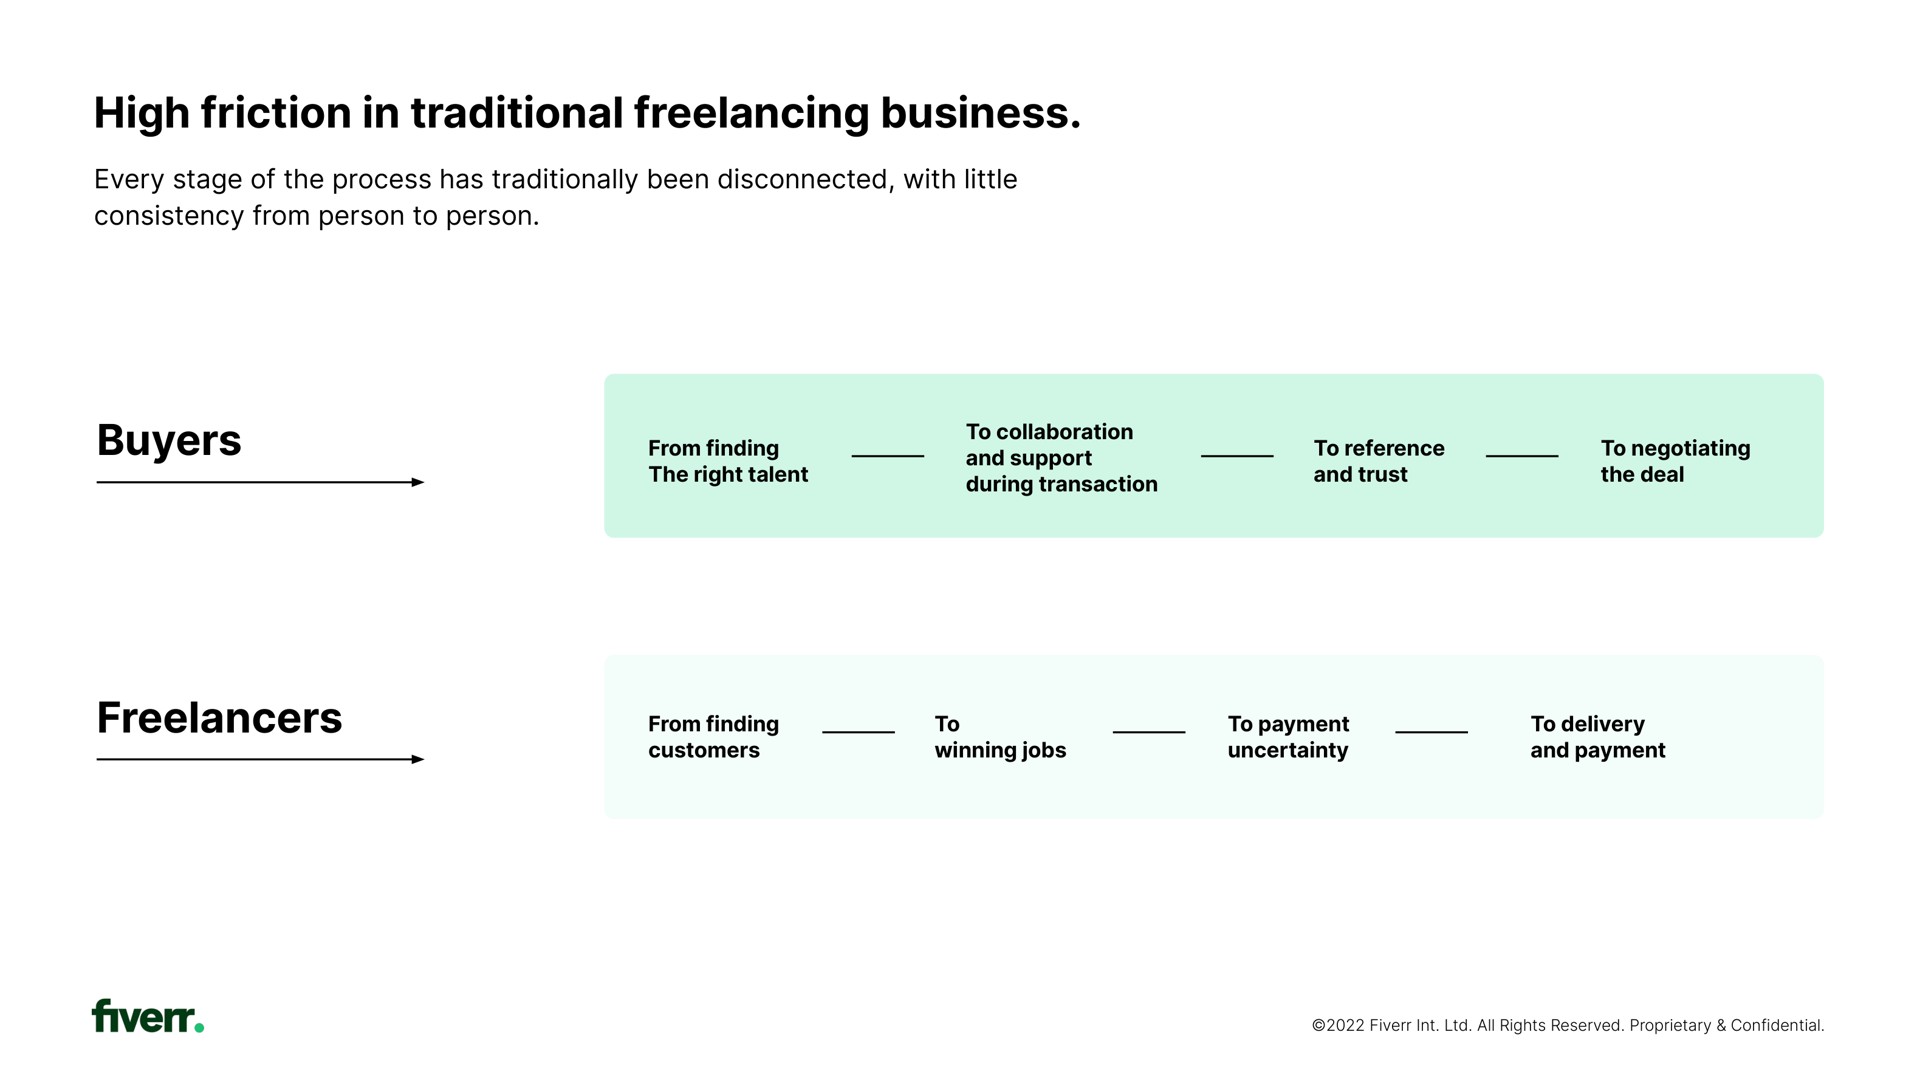 high friction in traditional business buyers | Fiverr